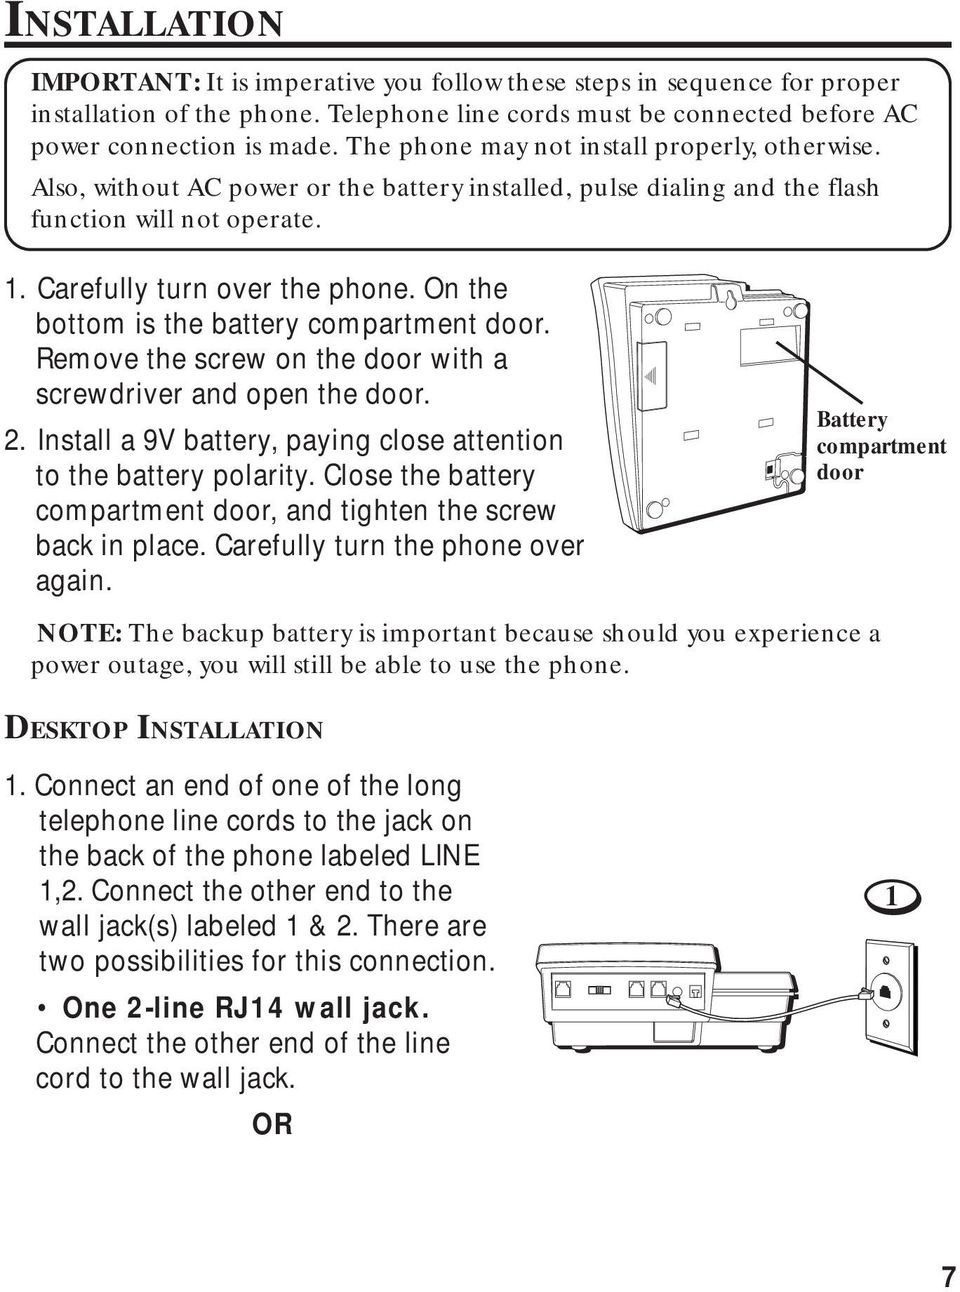 On the bottom is the battery compartment door. Remove the screw on the door with a screwdriver and open the door. 2. Install a 9V battery, paying close attention to the battery polarity.